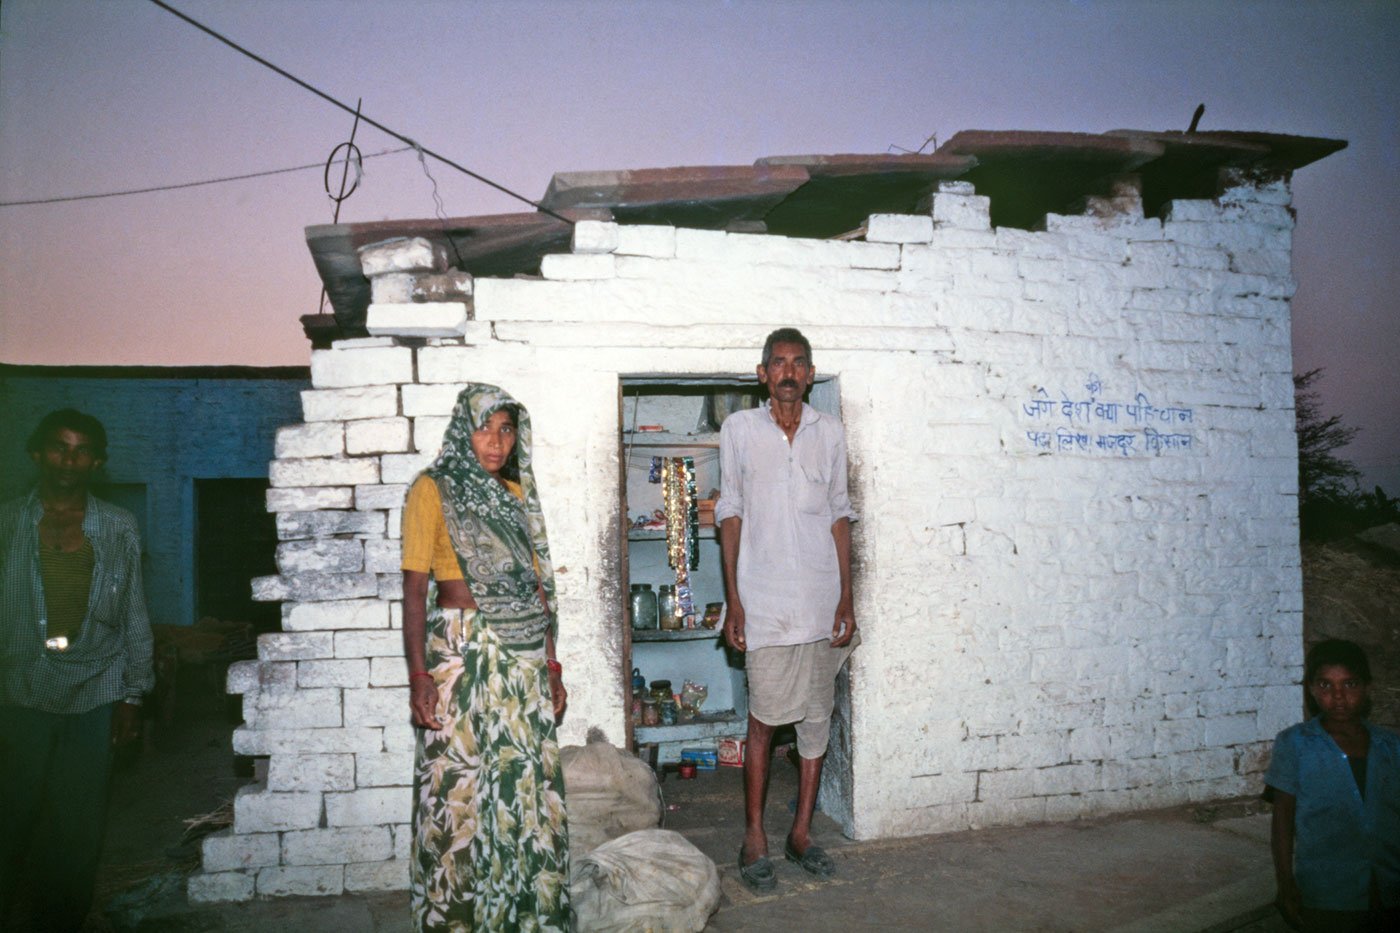 Mangi Lai Jatav and his wife in Naksoda village in Dholupur district. A man and a woman standing outside a hut